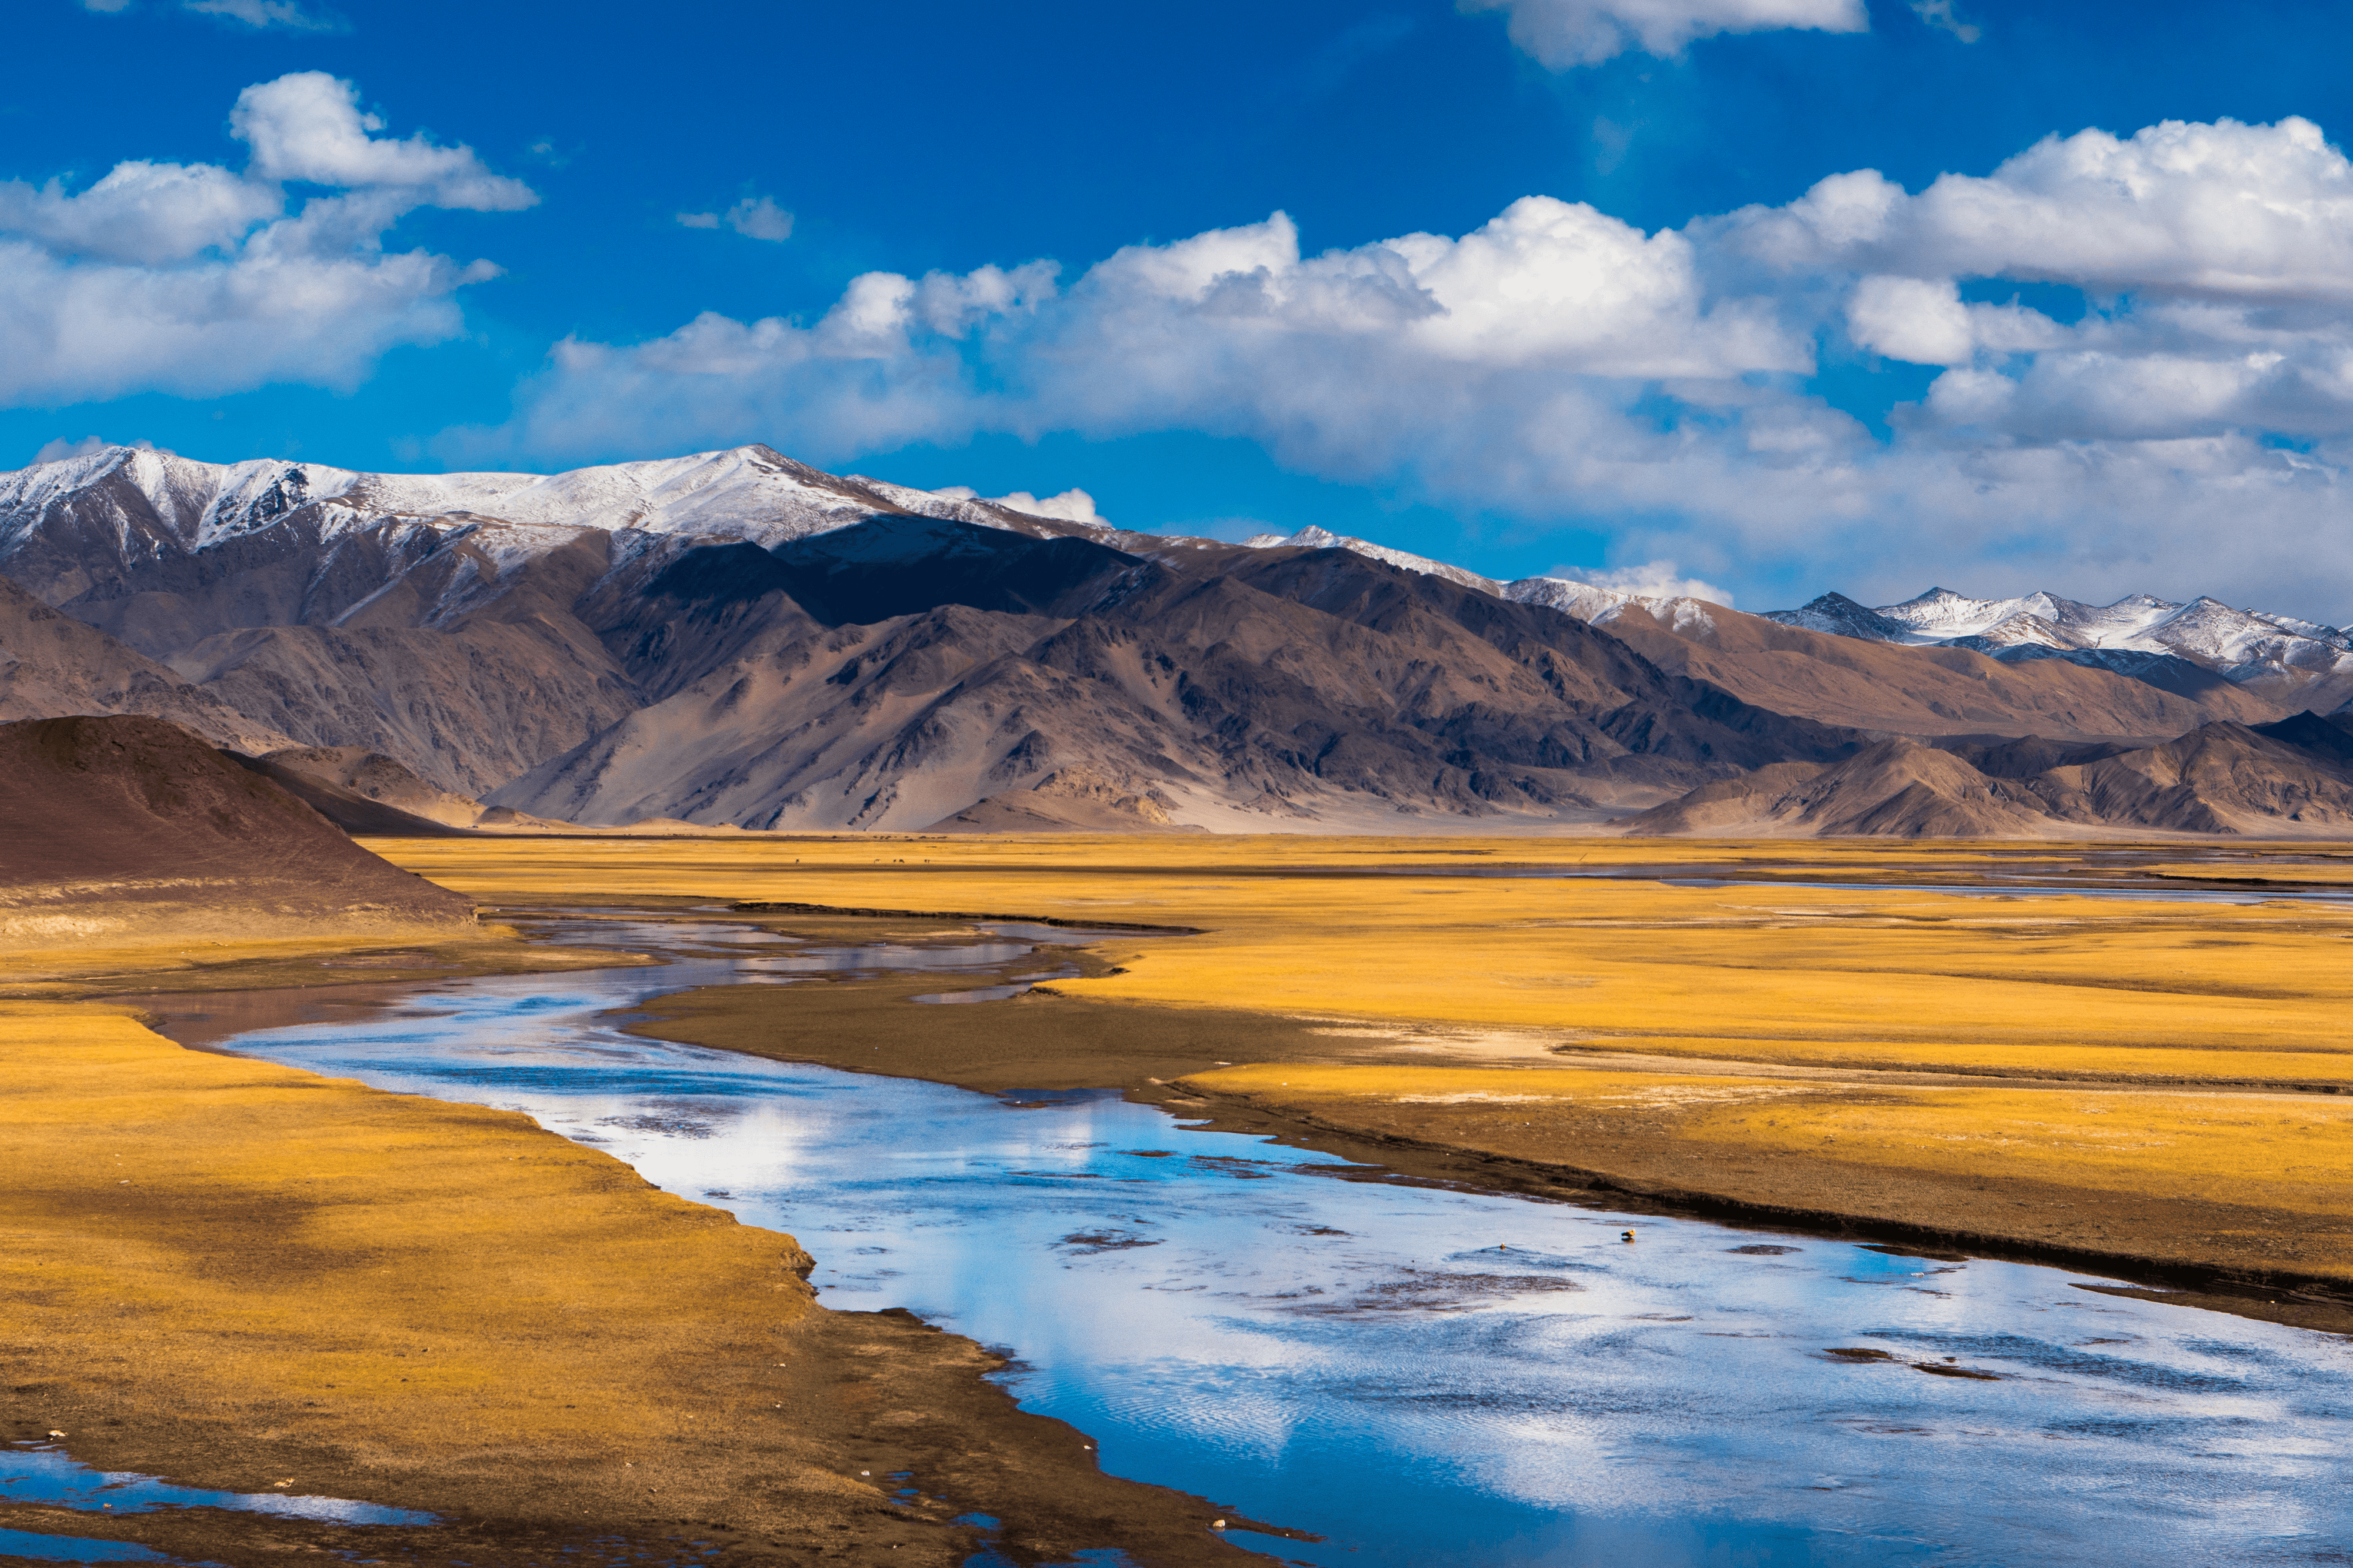 Heaven is a myth, Ladakh is real